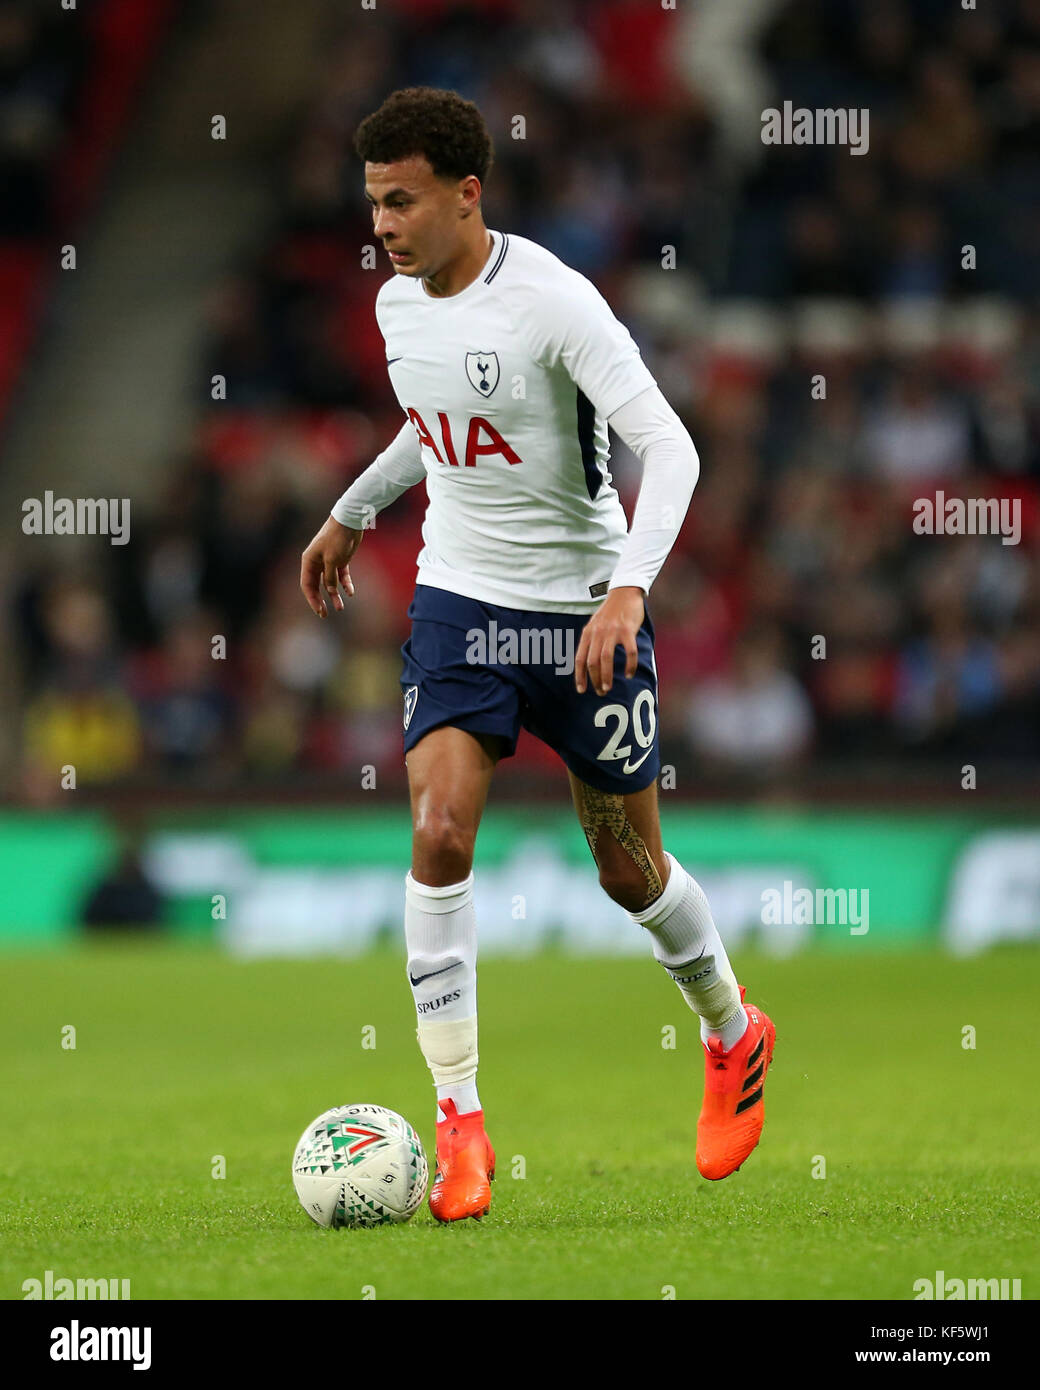 Tottenham Hotspur's Dele Alli during the Carabao Cup, Fourth Round match at Wembley, London. PRESS ASSOCIATION Photo. Picture date: Wednesday October 25, 2017. See PA story SOCCER Tottenham. Photo credit should read: Steven Paston/PA Wire. RESTRICTIONS: No use with unauthorised audio, video, data, fixture lists, club/league logos or 'live' services. Online in-match use limited to 75 images, no video emulation. No use in betting, games or single club/league/player publications. Stock Photo